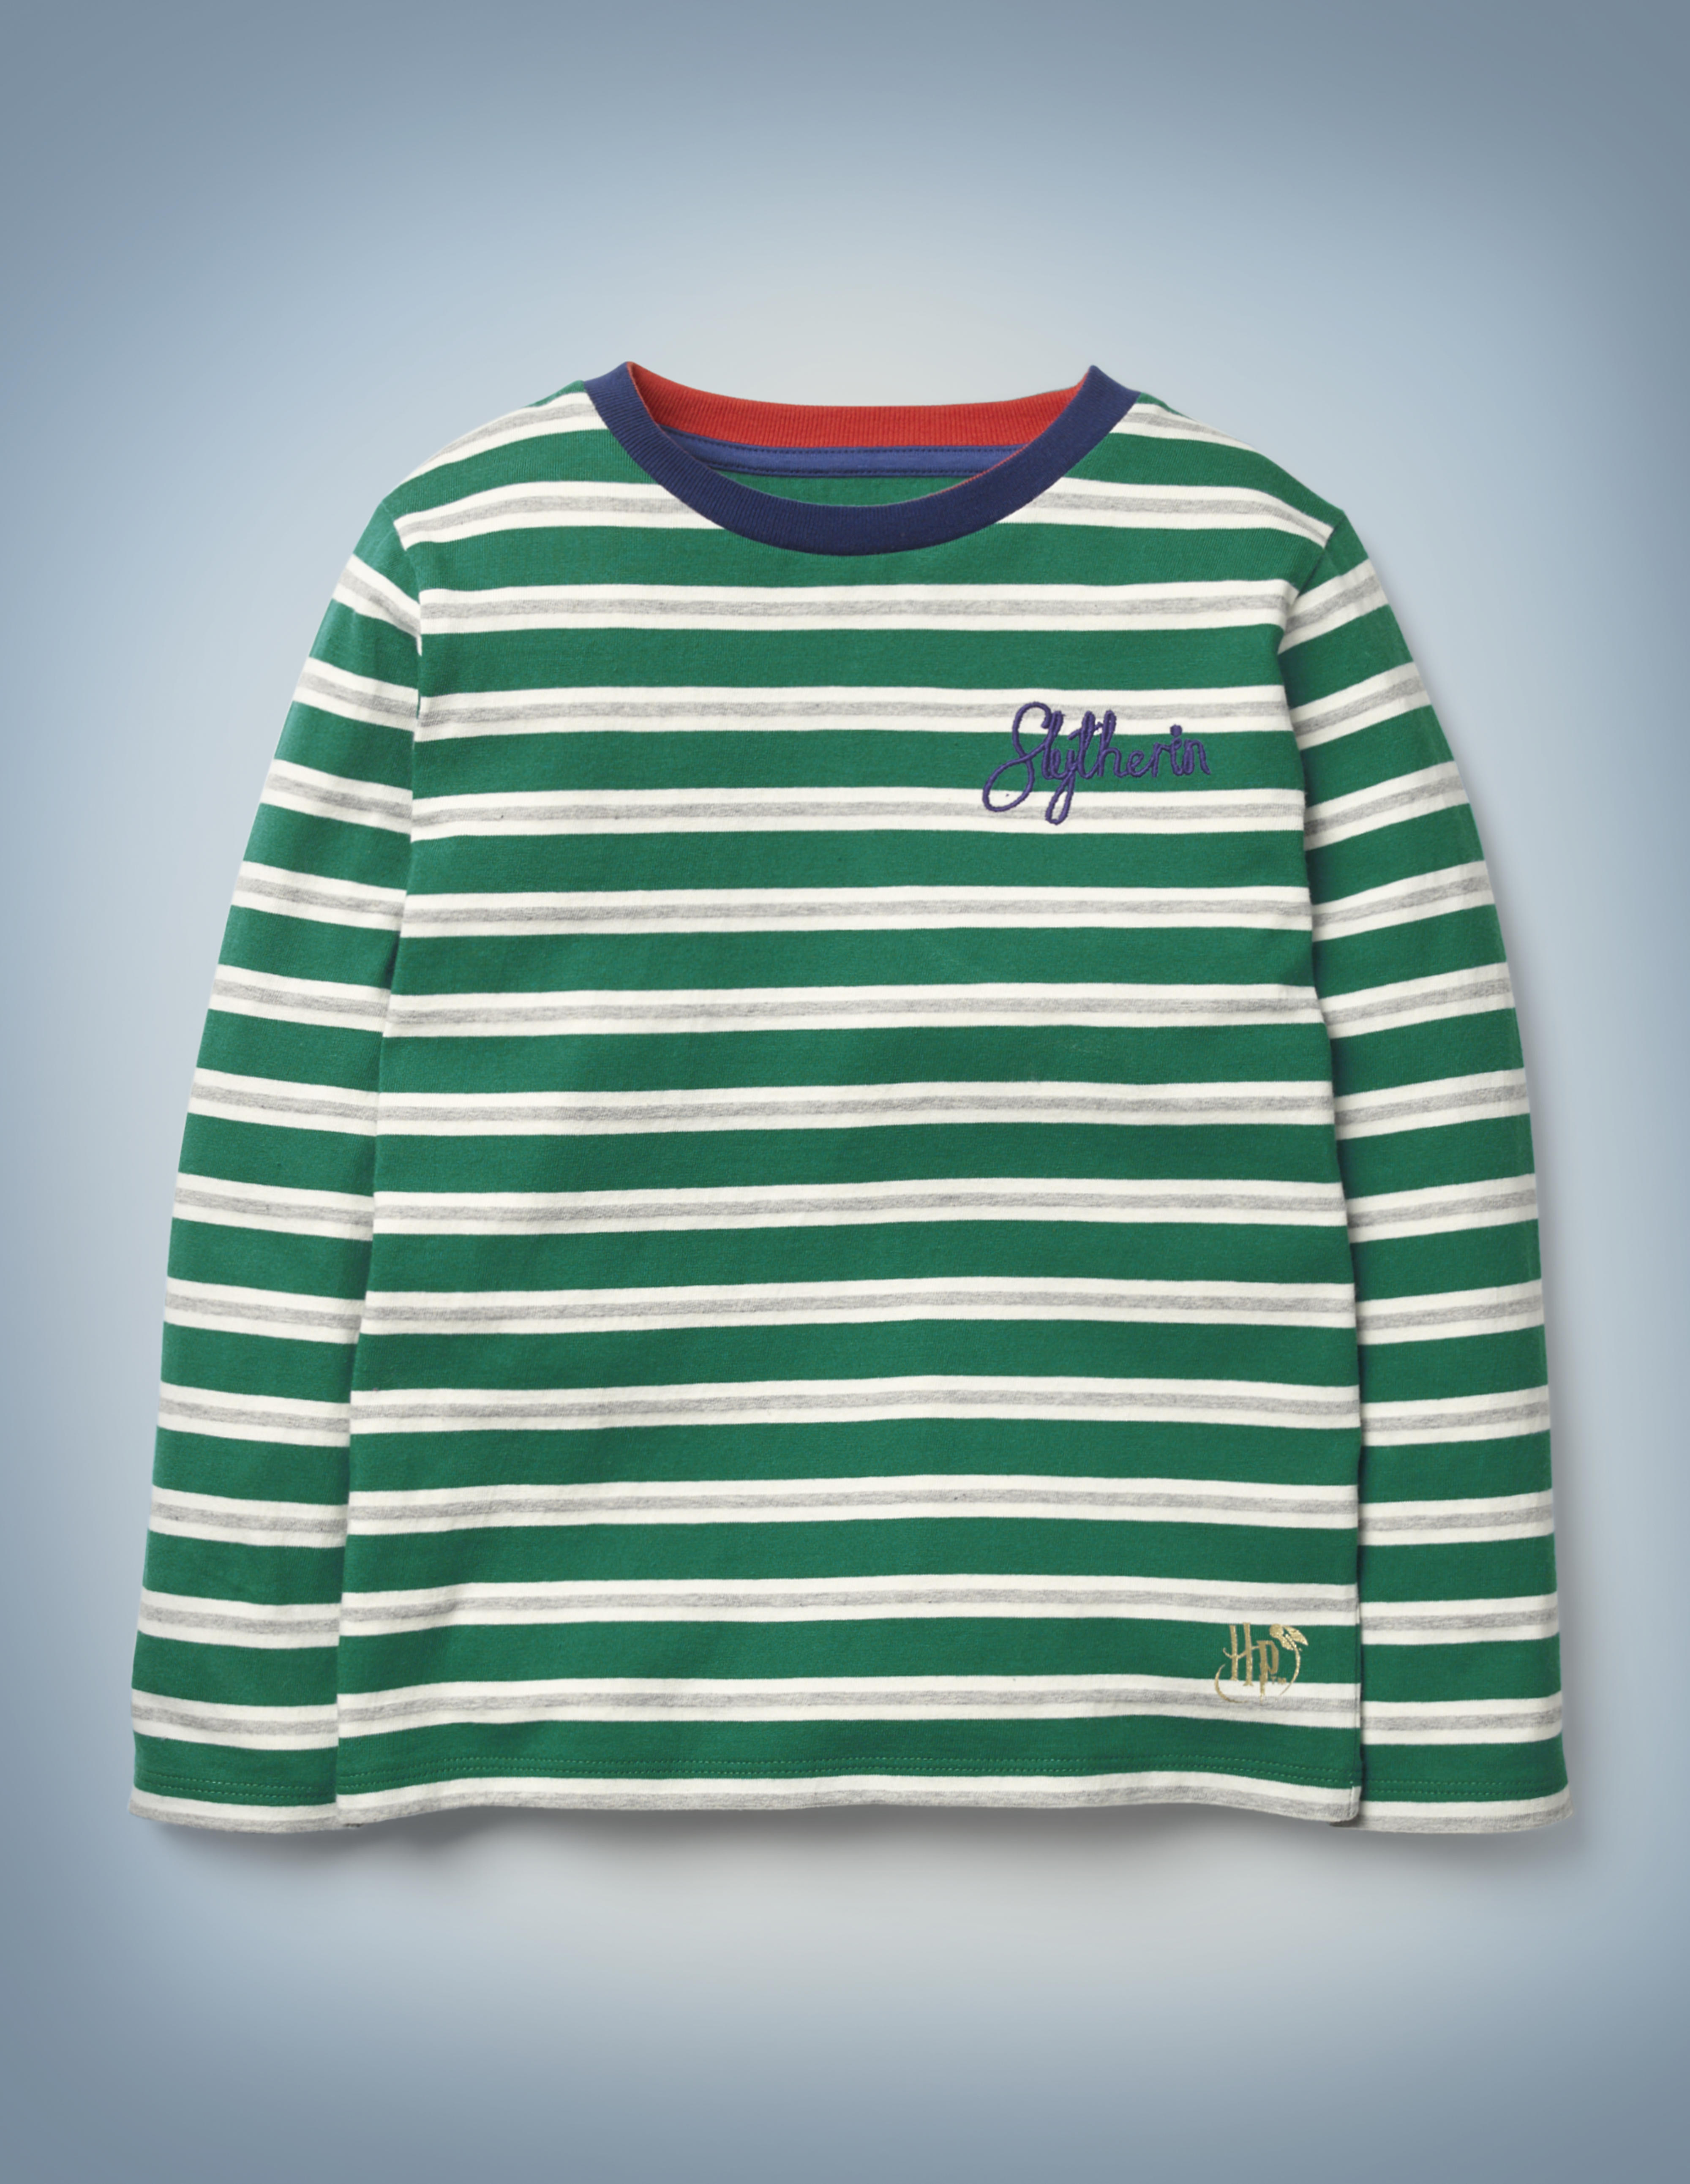 The Mini Boden House Breton in green features all-over green and silver stripes, a blue collar, and “Slytherin” written in blue script in the front pocket area. It retails between £20 and £22.